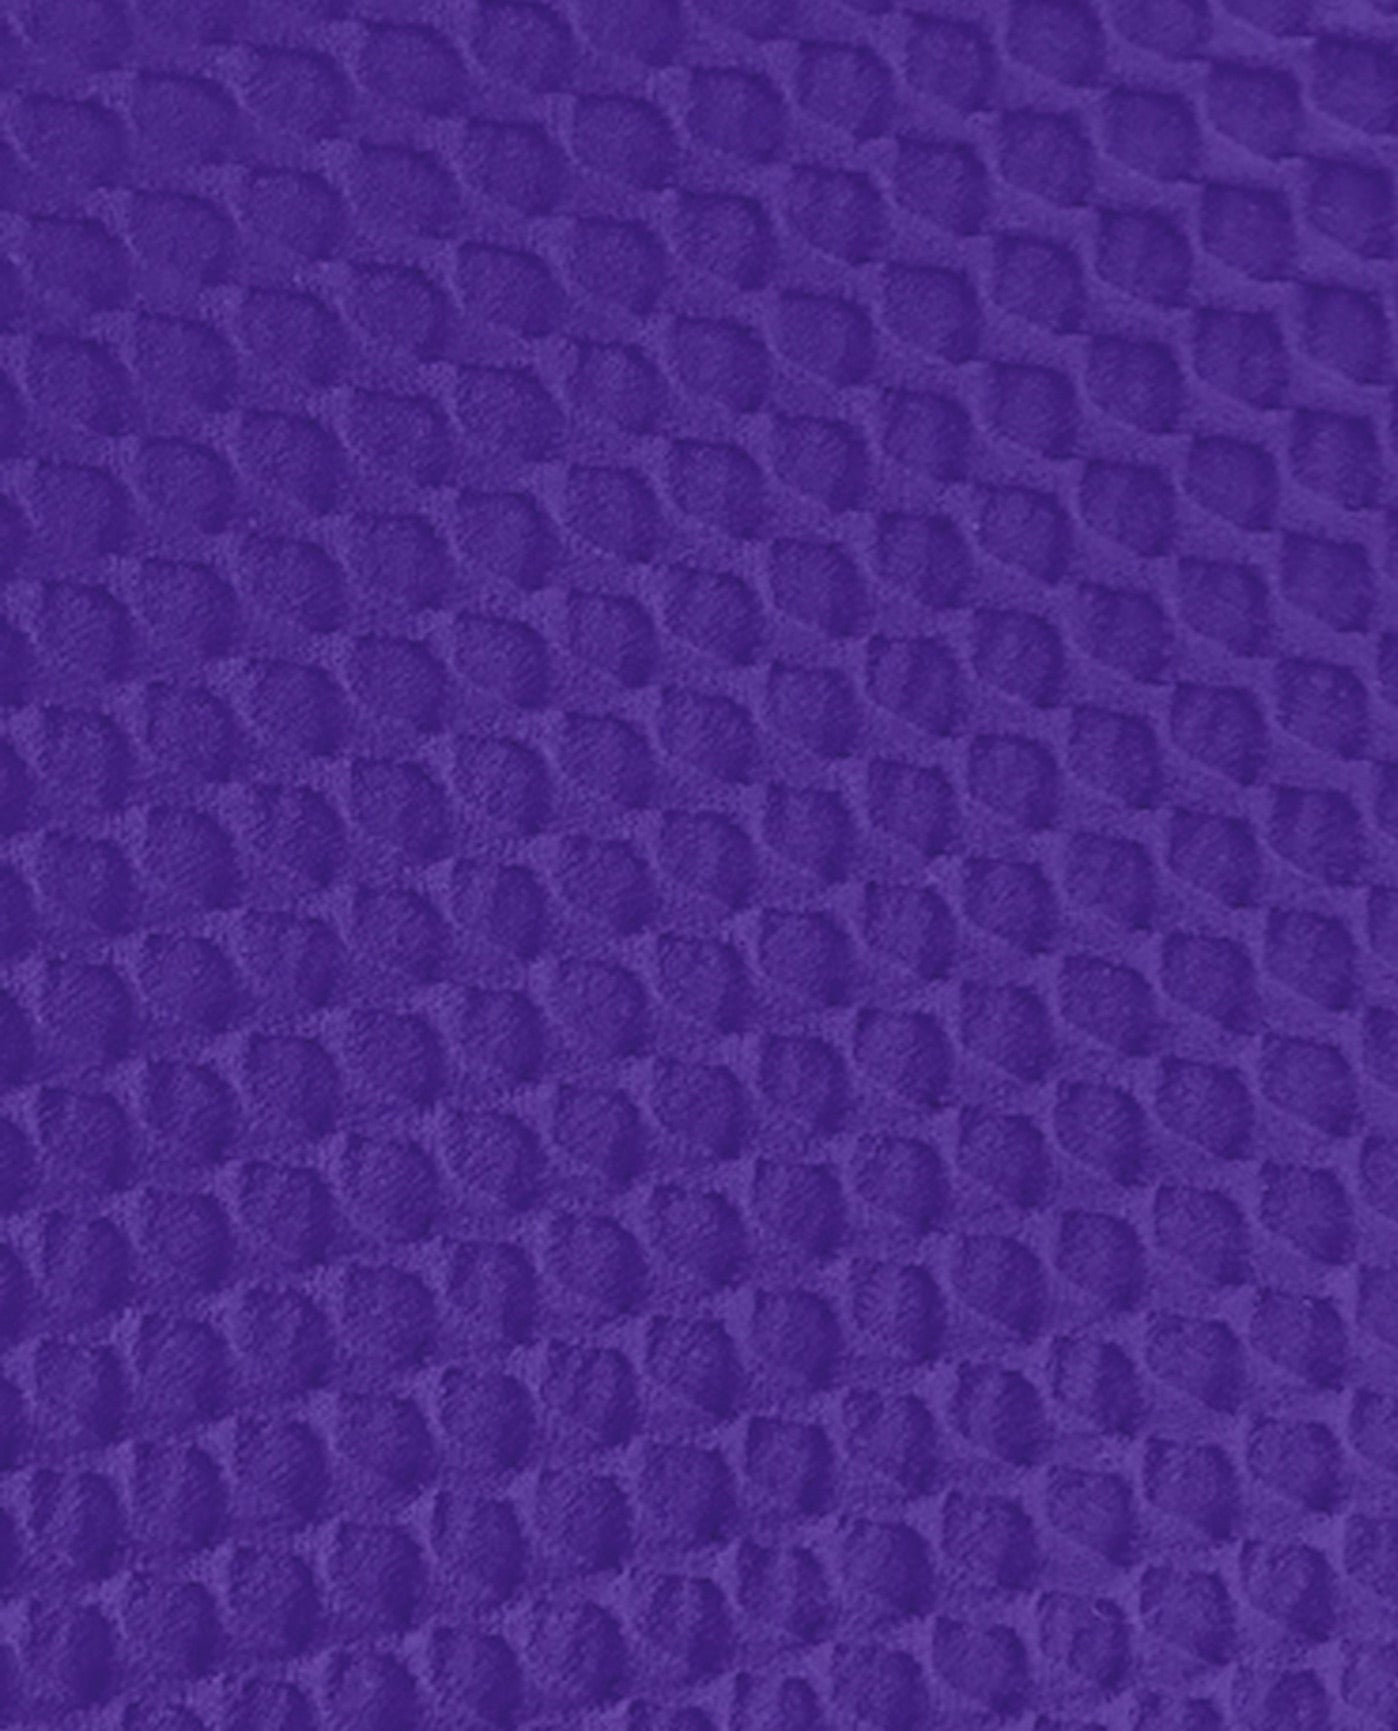 FABRIC SWATCH VIEW OF CHLORINE RESISTANT AQUAMORE SOLID TEXTURED SHIRRED FRONT ONE PIECE SWIMSUIT | 510 AQT TEXTURED PURPLE